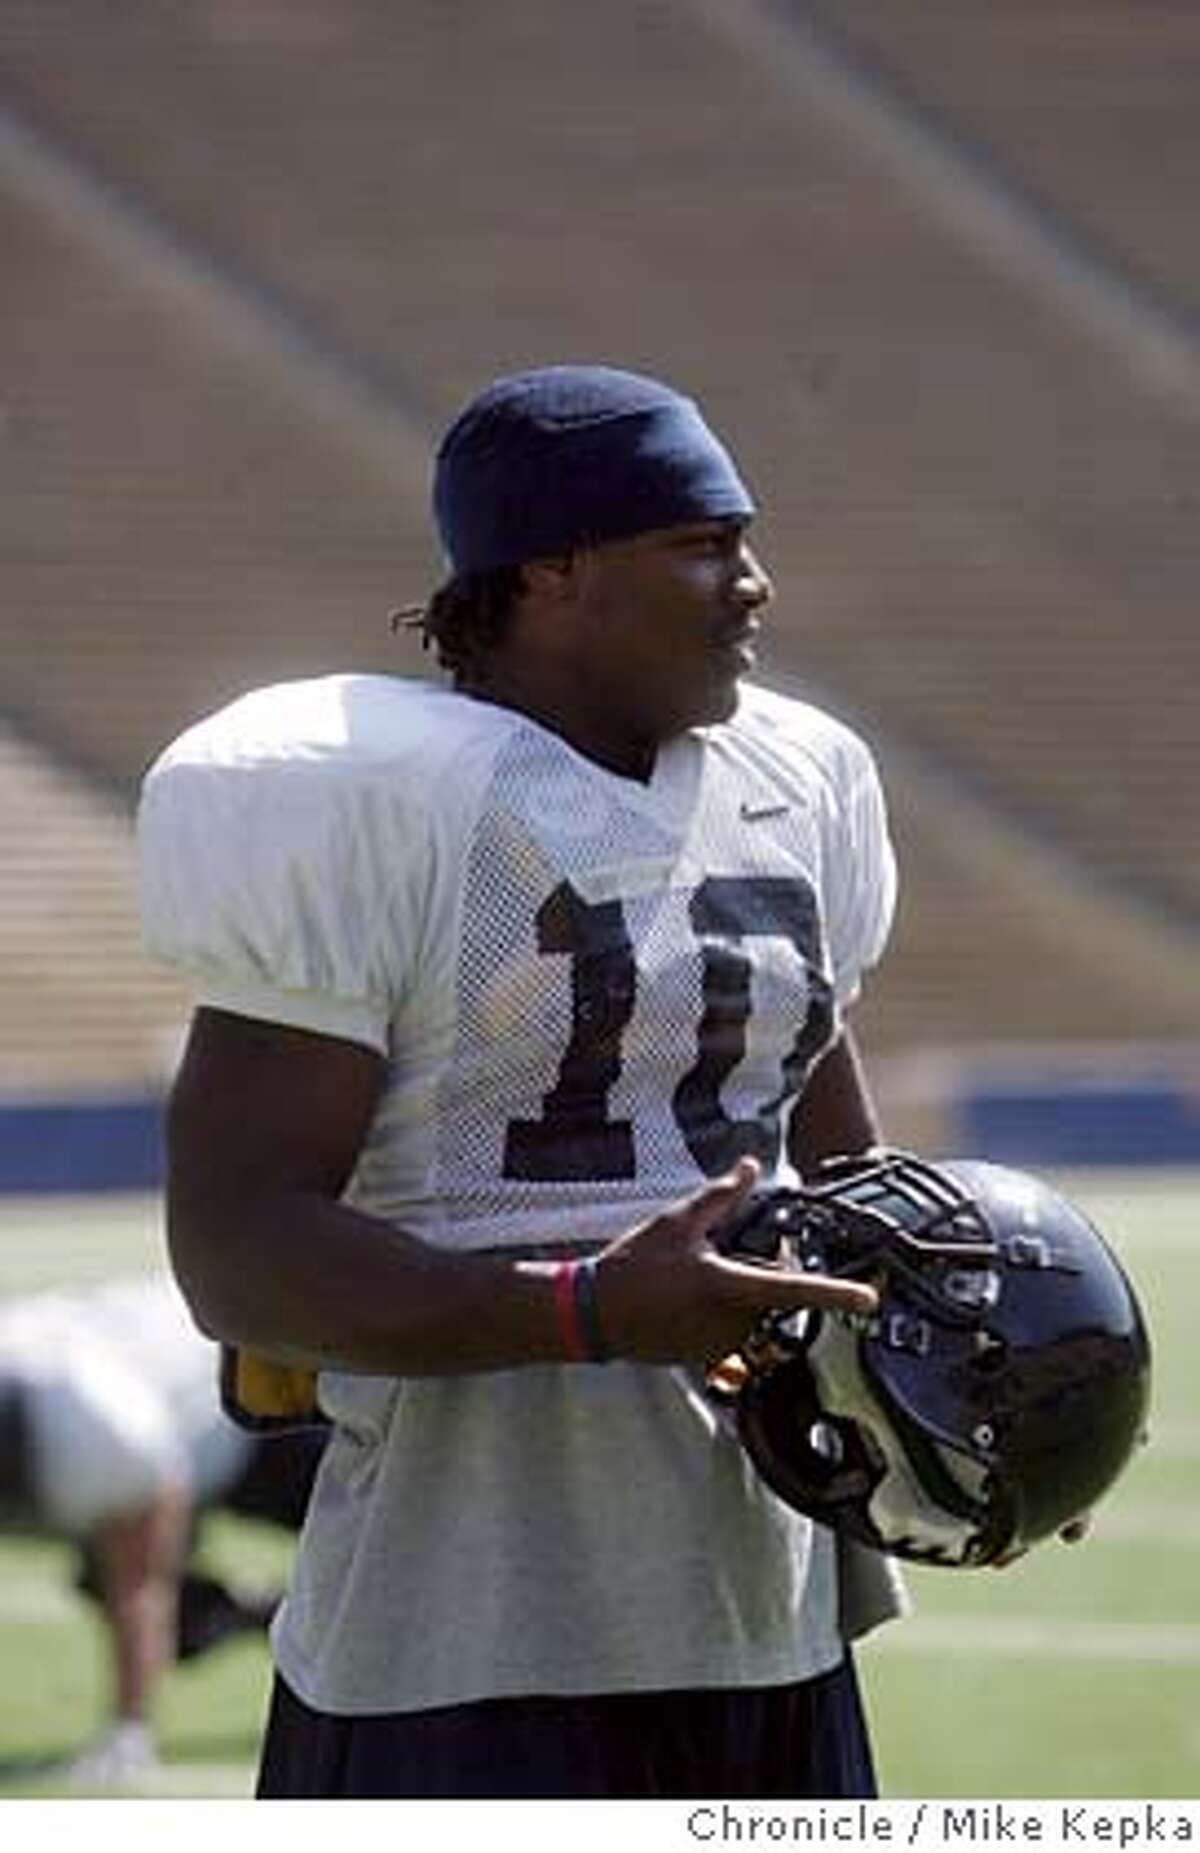 cal28058_mk.JPG CAL running back Marshawn Lynch after practice at memorial stadium in Berkeley. 8/24/05 Mike Kepka / The Chronicle Ran on: 09-10-2005 Tailback Marshawn Lynch will be a major concern for Washingtons defense today in Seattle. ALSO Ran on: 09-10-2005 Tailback Marshawn Lynch will be a major concern for Washingtons defense today in Seattle. MANDATORY CREDIT FOR PHOTOG AND SF CHRONICLE/ -MAGS OUT